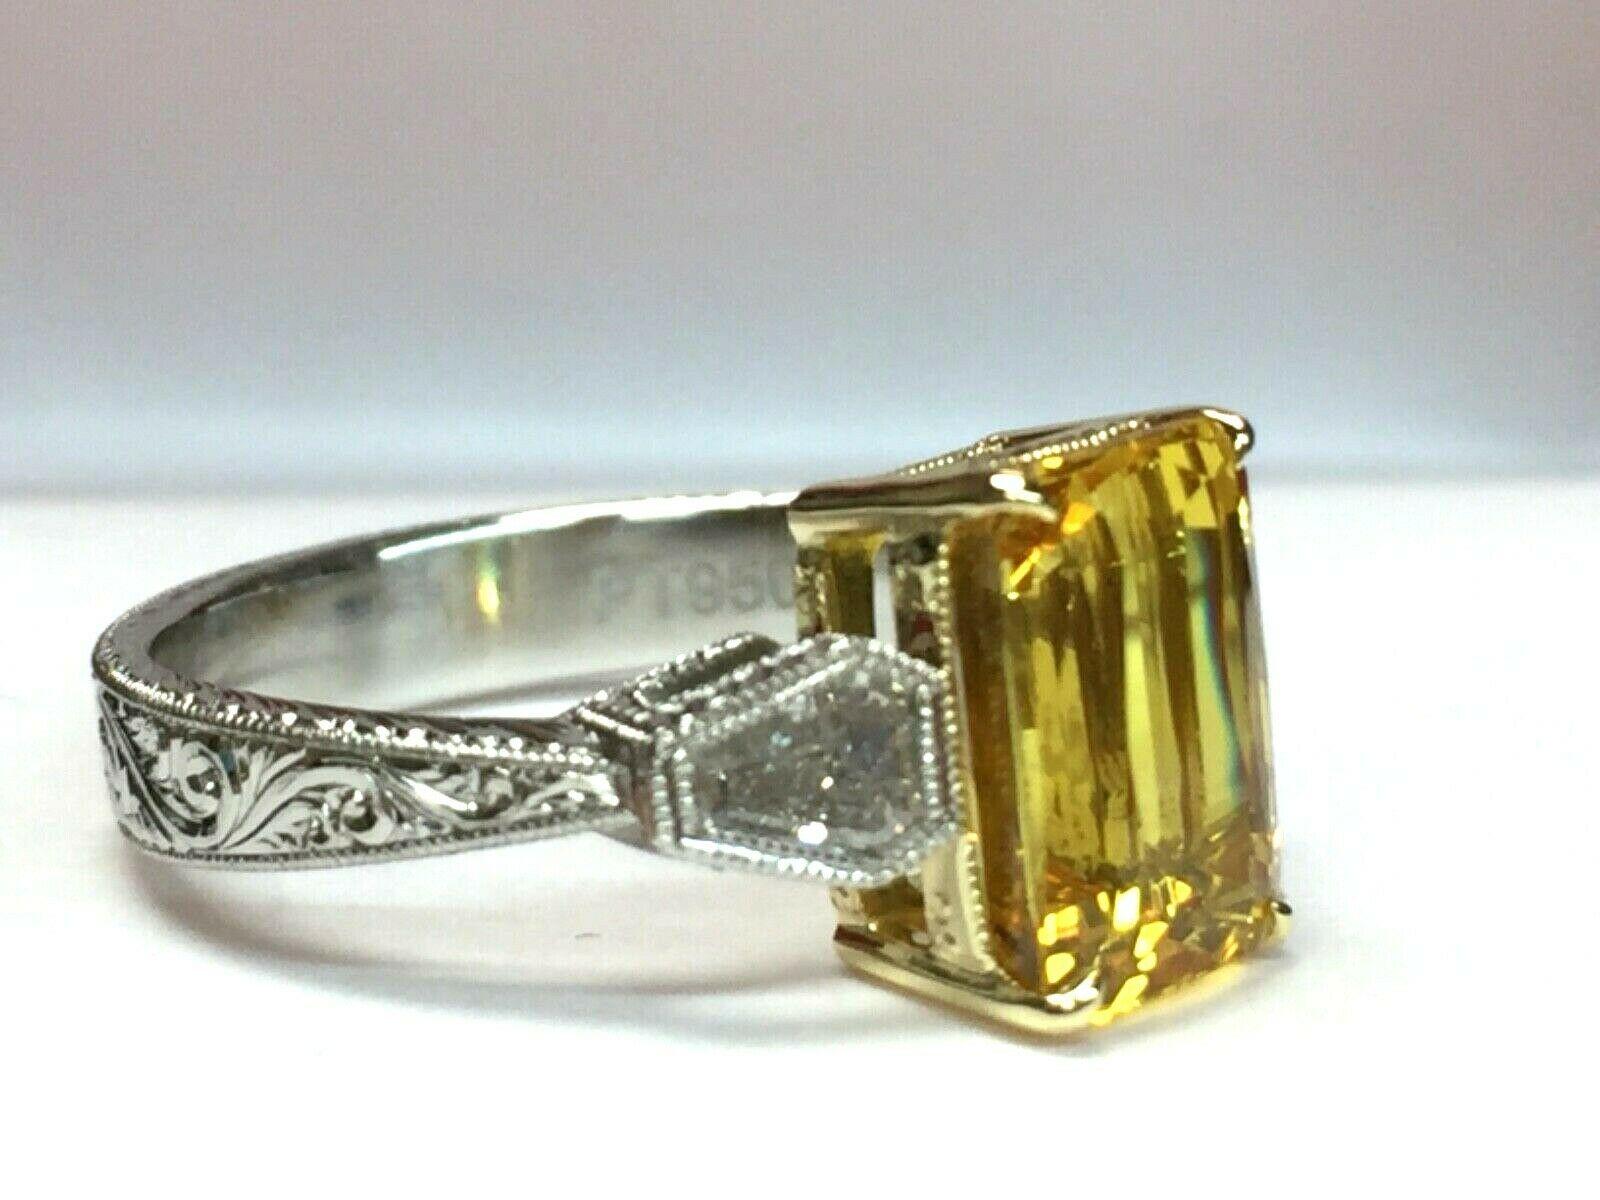 For your consideration is a 4.02 carat Octagonal Step cut, natural, bright deep yellow sapphire set in a brand new platinum with 18k yellow gold basket setting with approximately .65 carats of natural G color VS clarity white diamonds.  The sapphire